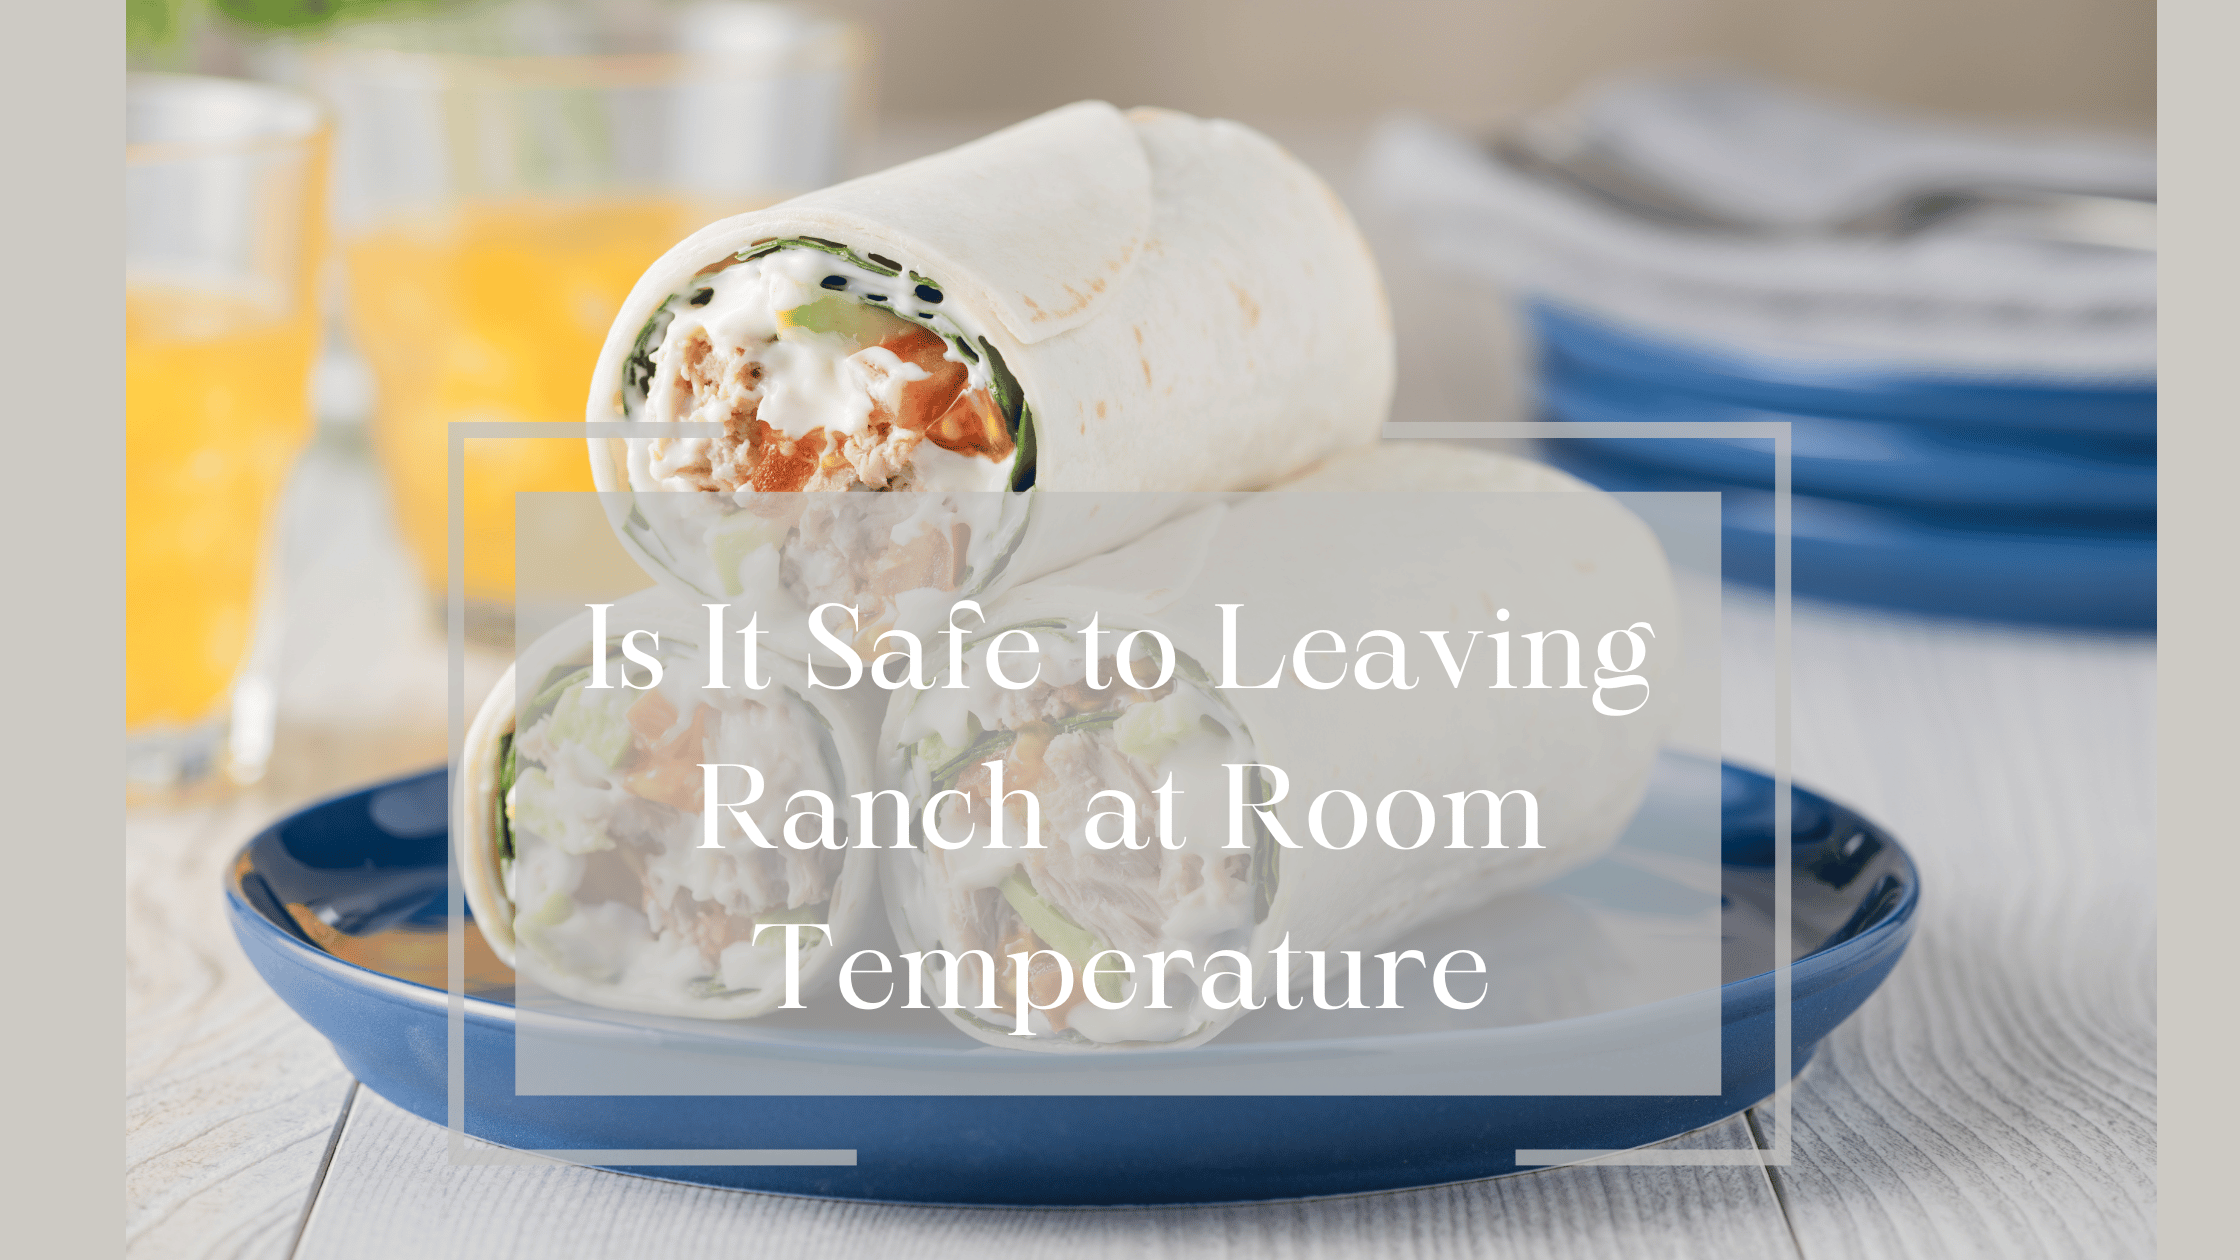 Is It Safe to Leave the Ranch at Room Temperature